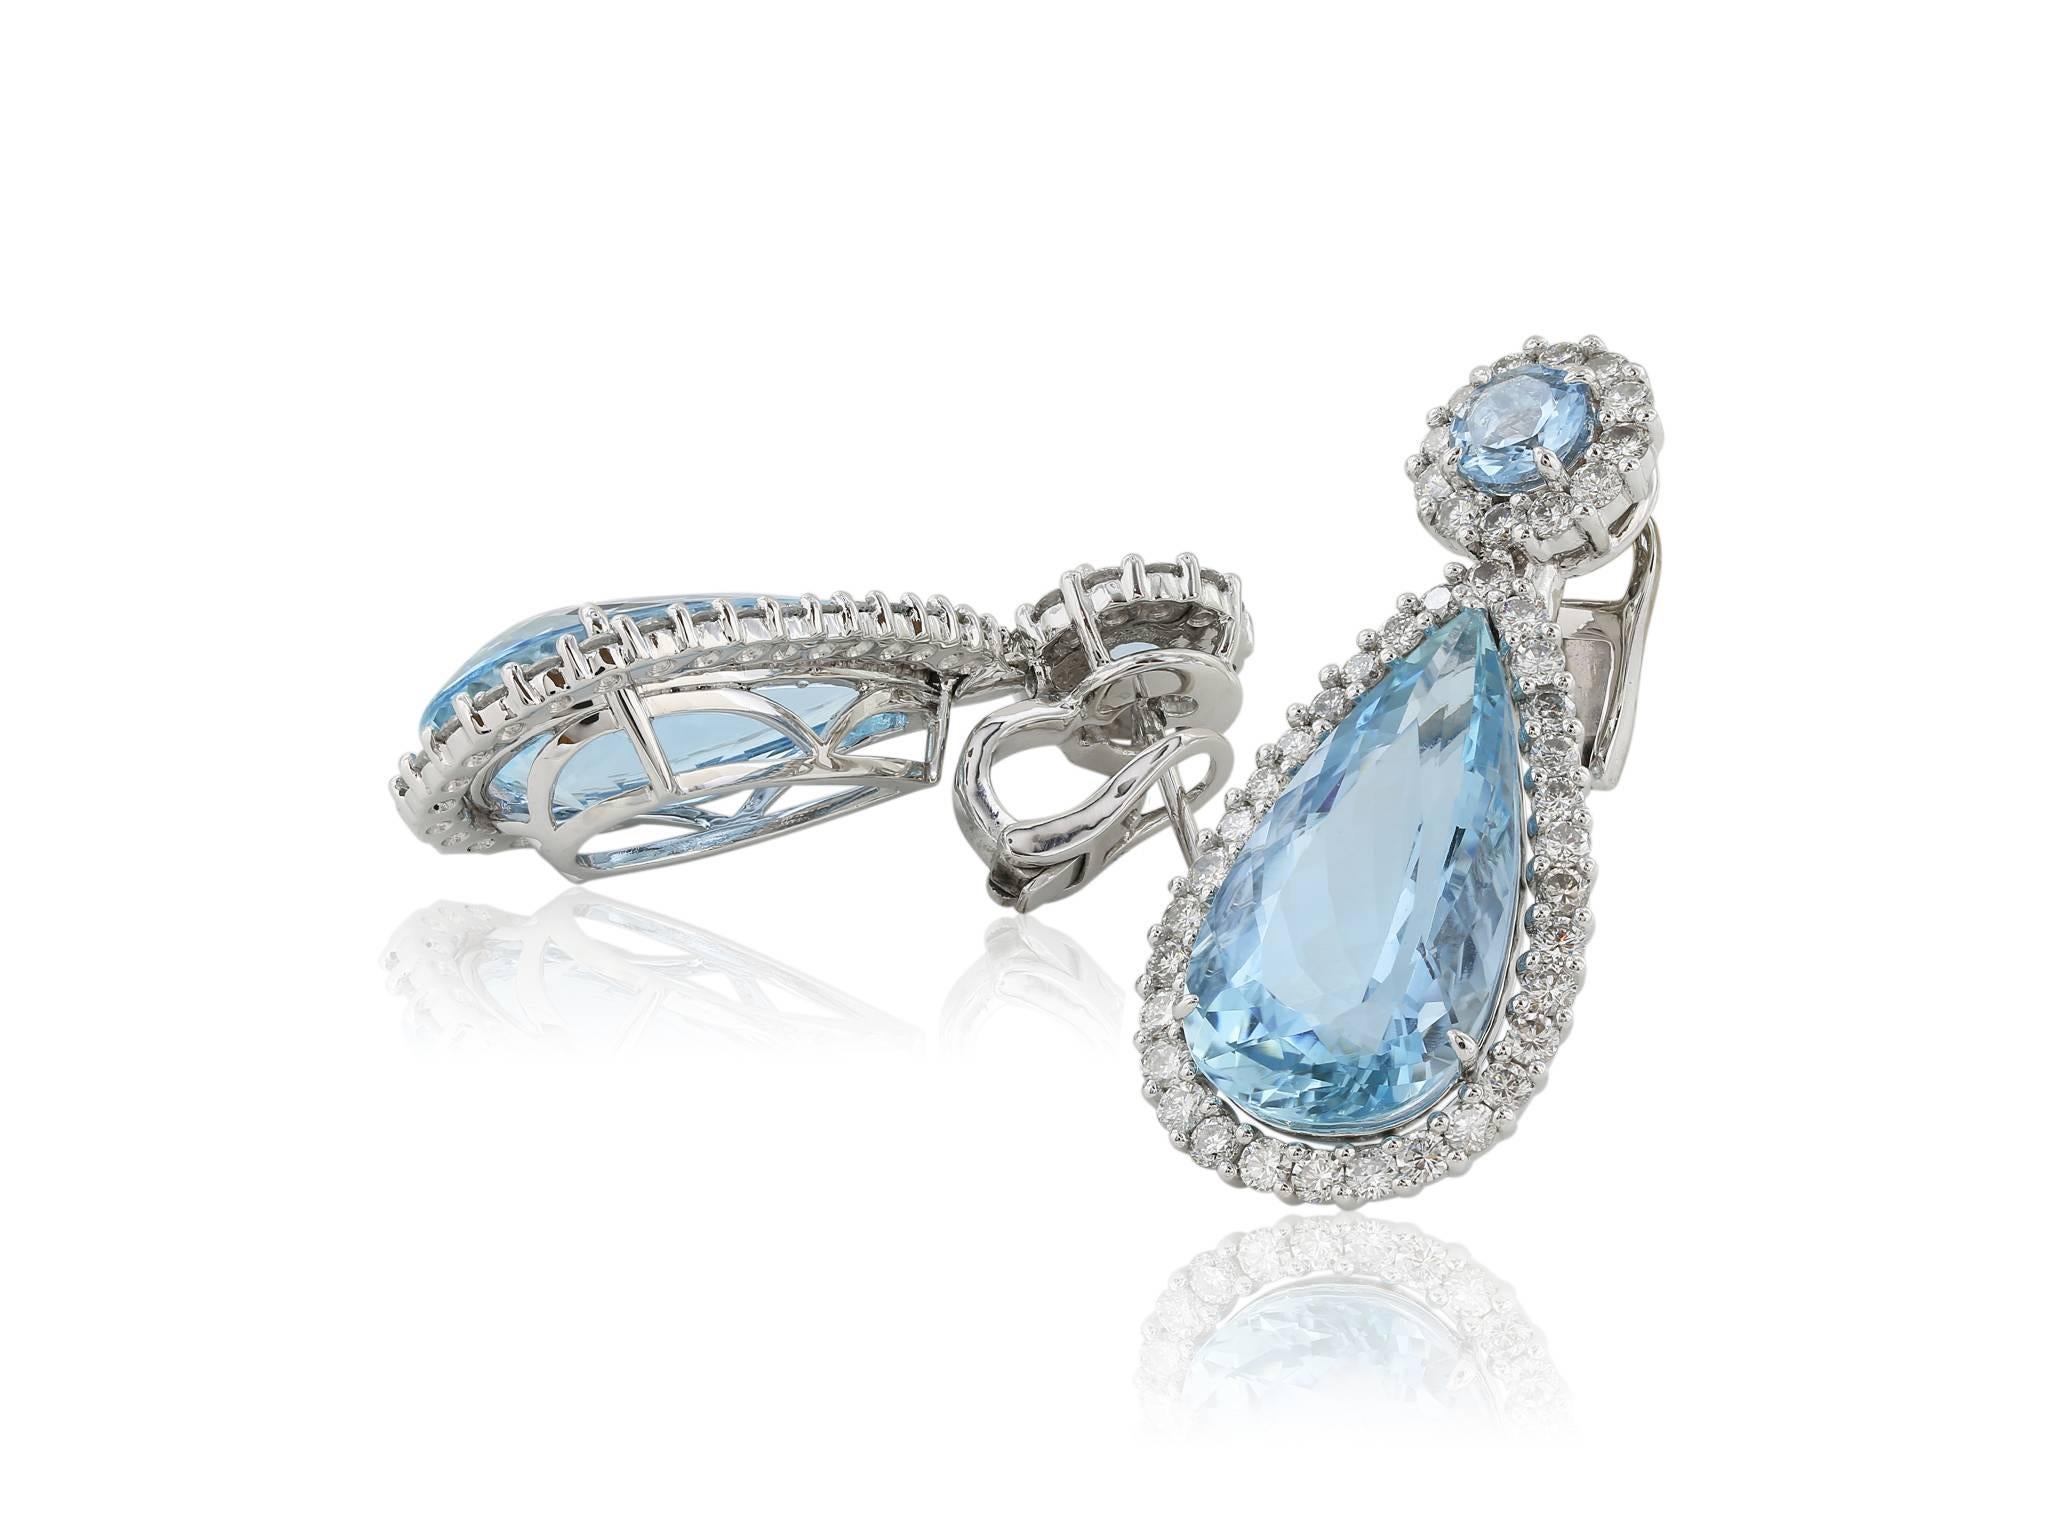 Platinum Pear shape Aquamarine and diamond drop earrings. Consisting of 2 Pear Shape Aquamarines measuring 12.50x33.00 MM and weighing approximately 22 carats surrounded by full cut rbc diamonds having a total weight of approximately 1.75 carats